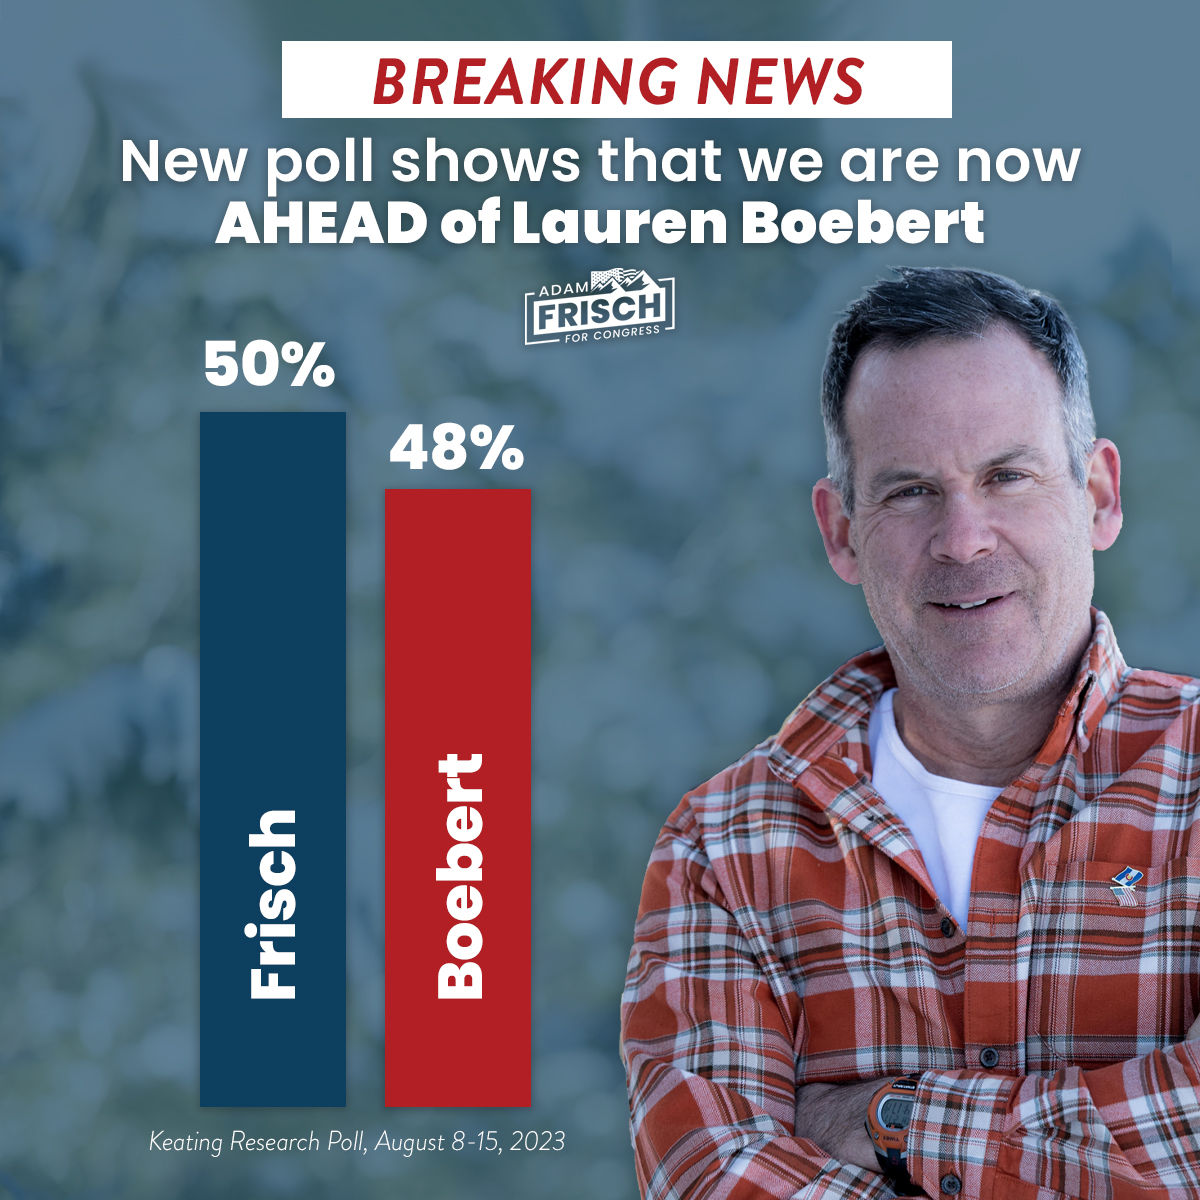 After losing to Lauren Boebert by just 546 votes last year, a brand-new poll now shows me LEADING Boebert by 2 points in our 2024 rematch!